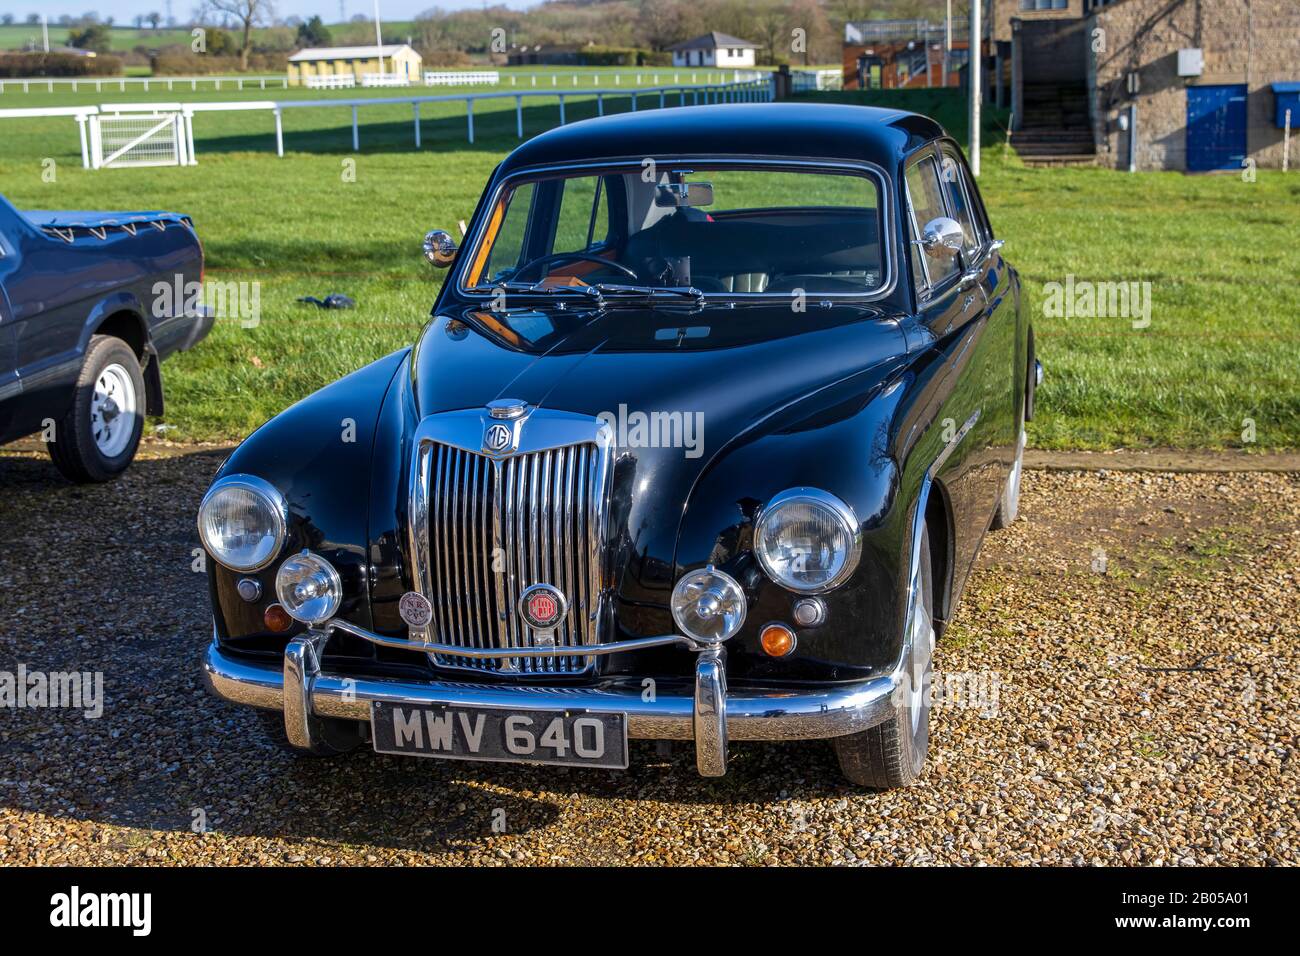 MG Magnette ZA, 1955, Reg No: MVW 640, at The Great Western Classic Car Show, Shepton Mallet UK, Febuary 08, 2020 Stock Photo